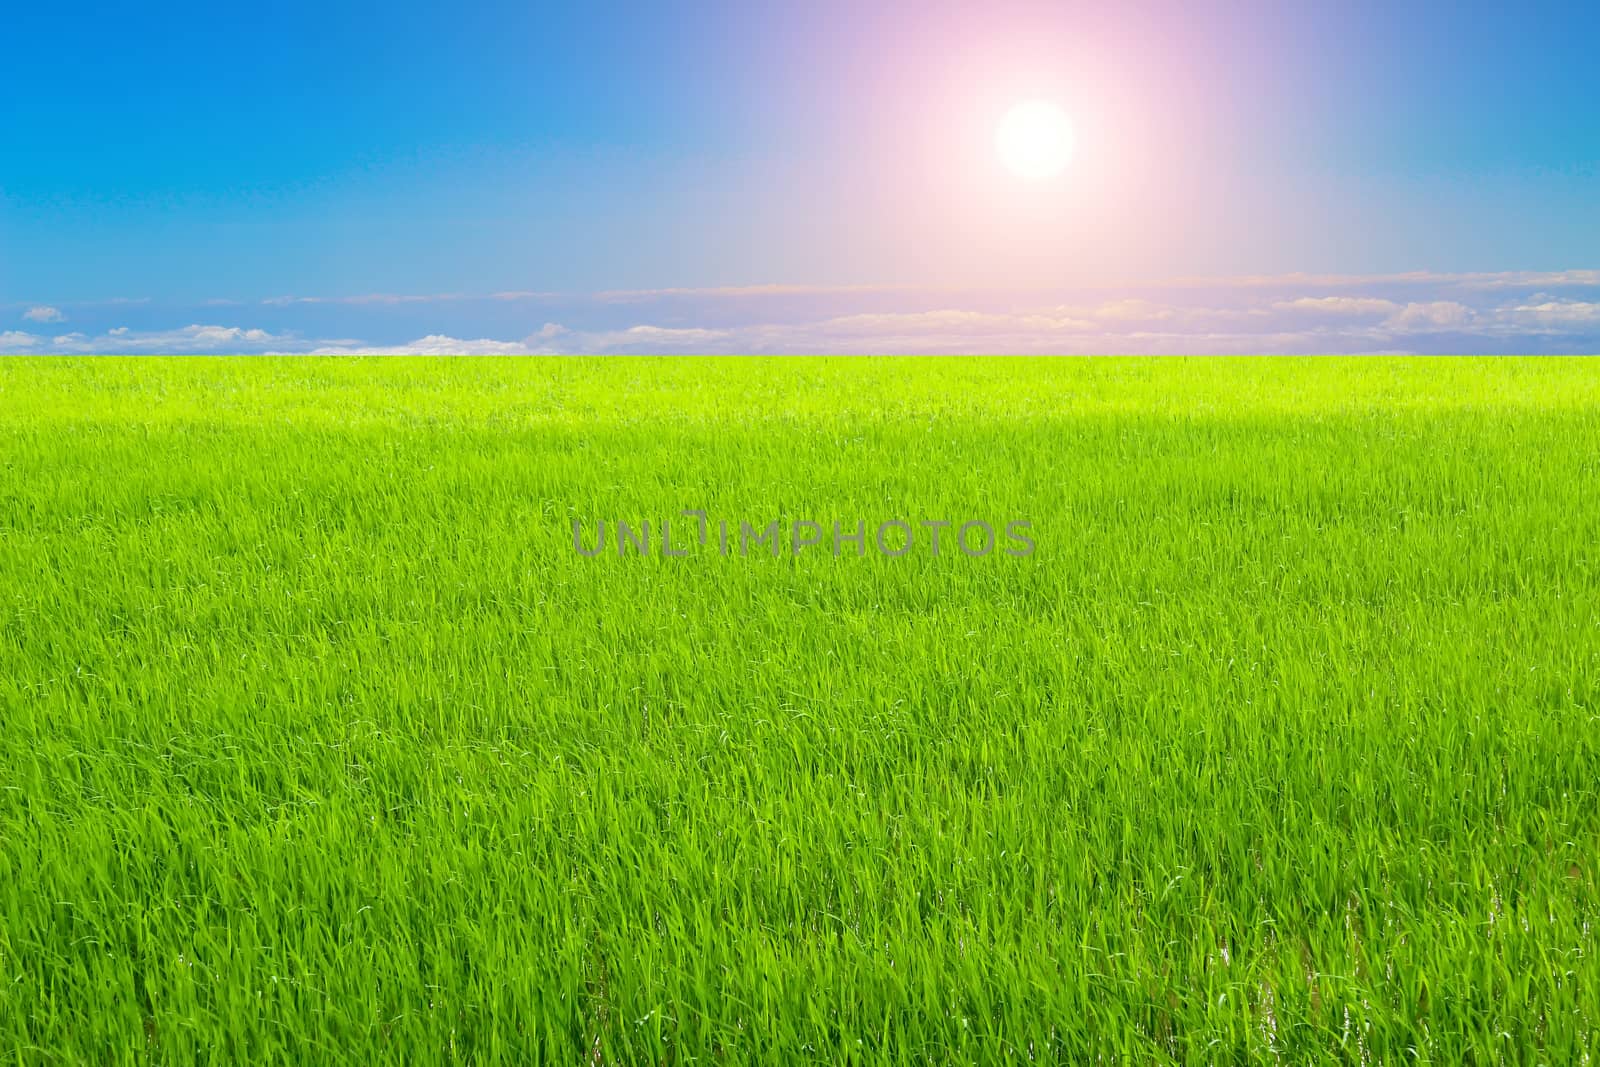 Green paddy and sky